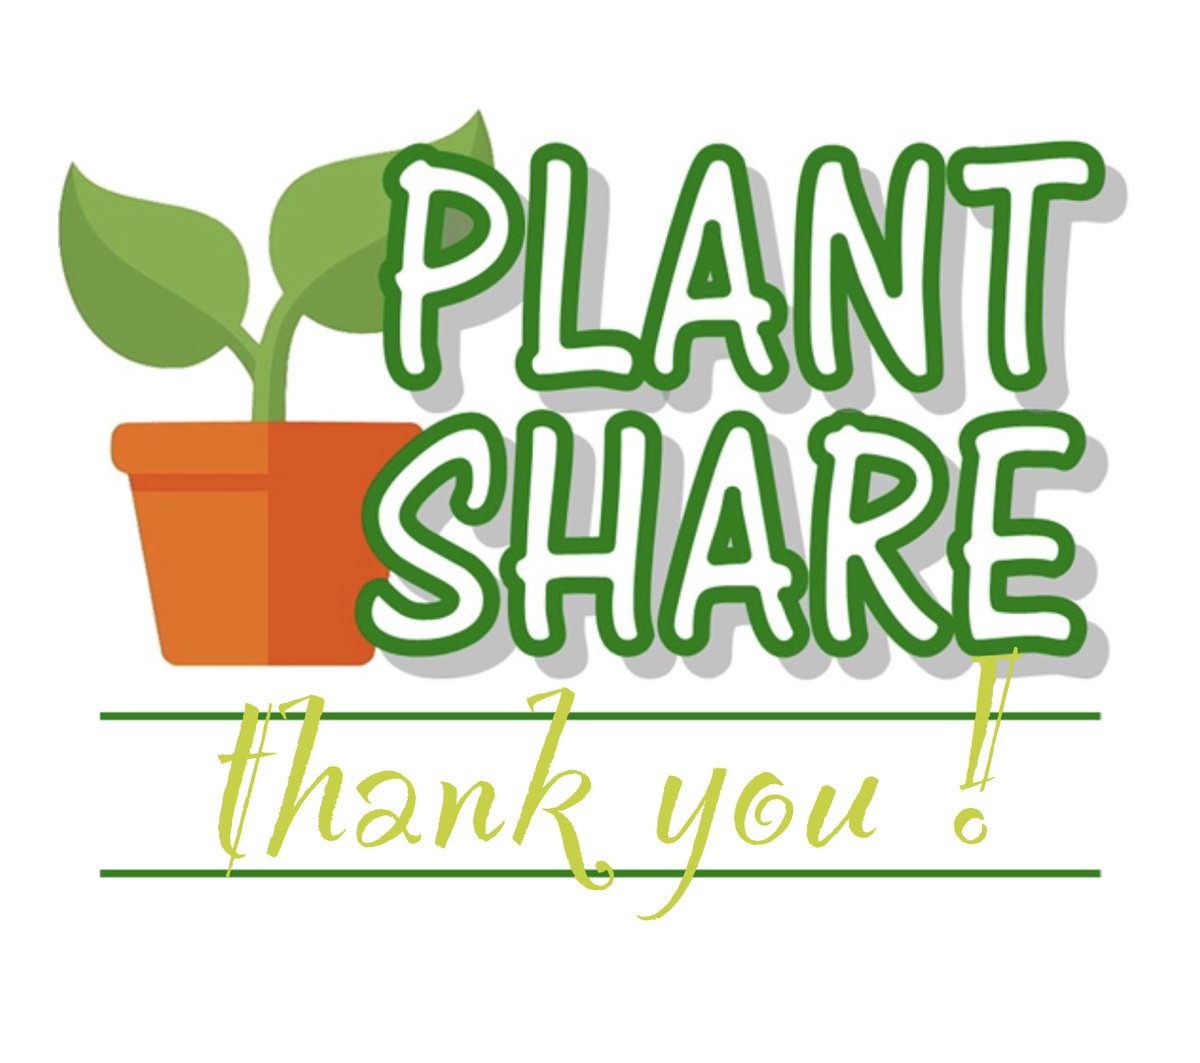 great couple of days at our community Plant Share. So encouraging to see plants and growing tips swapping around the village.  It’ll be back at the community centre early June !